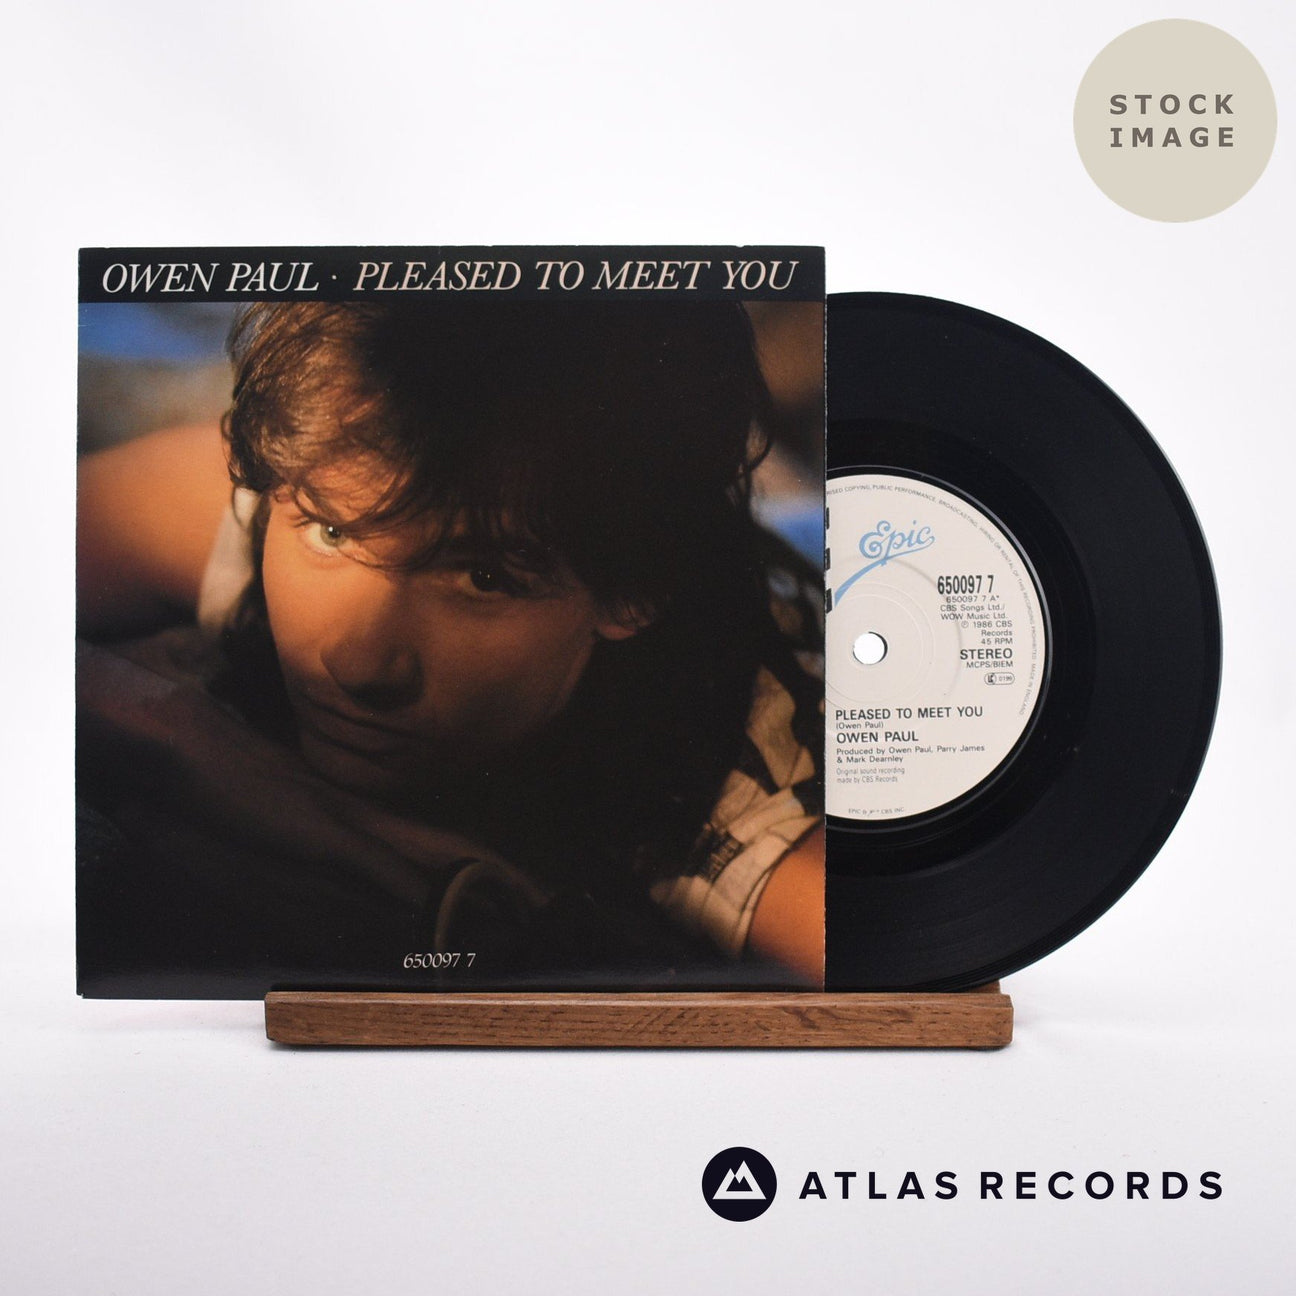 Owen Paul Pleased To Meet You 7" Vinyl Record - Sleeve & Record Side-By-Side